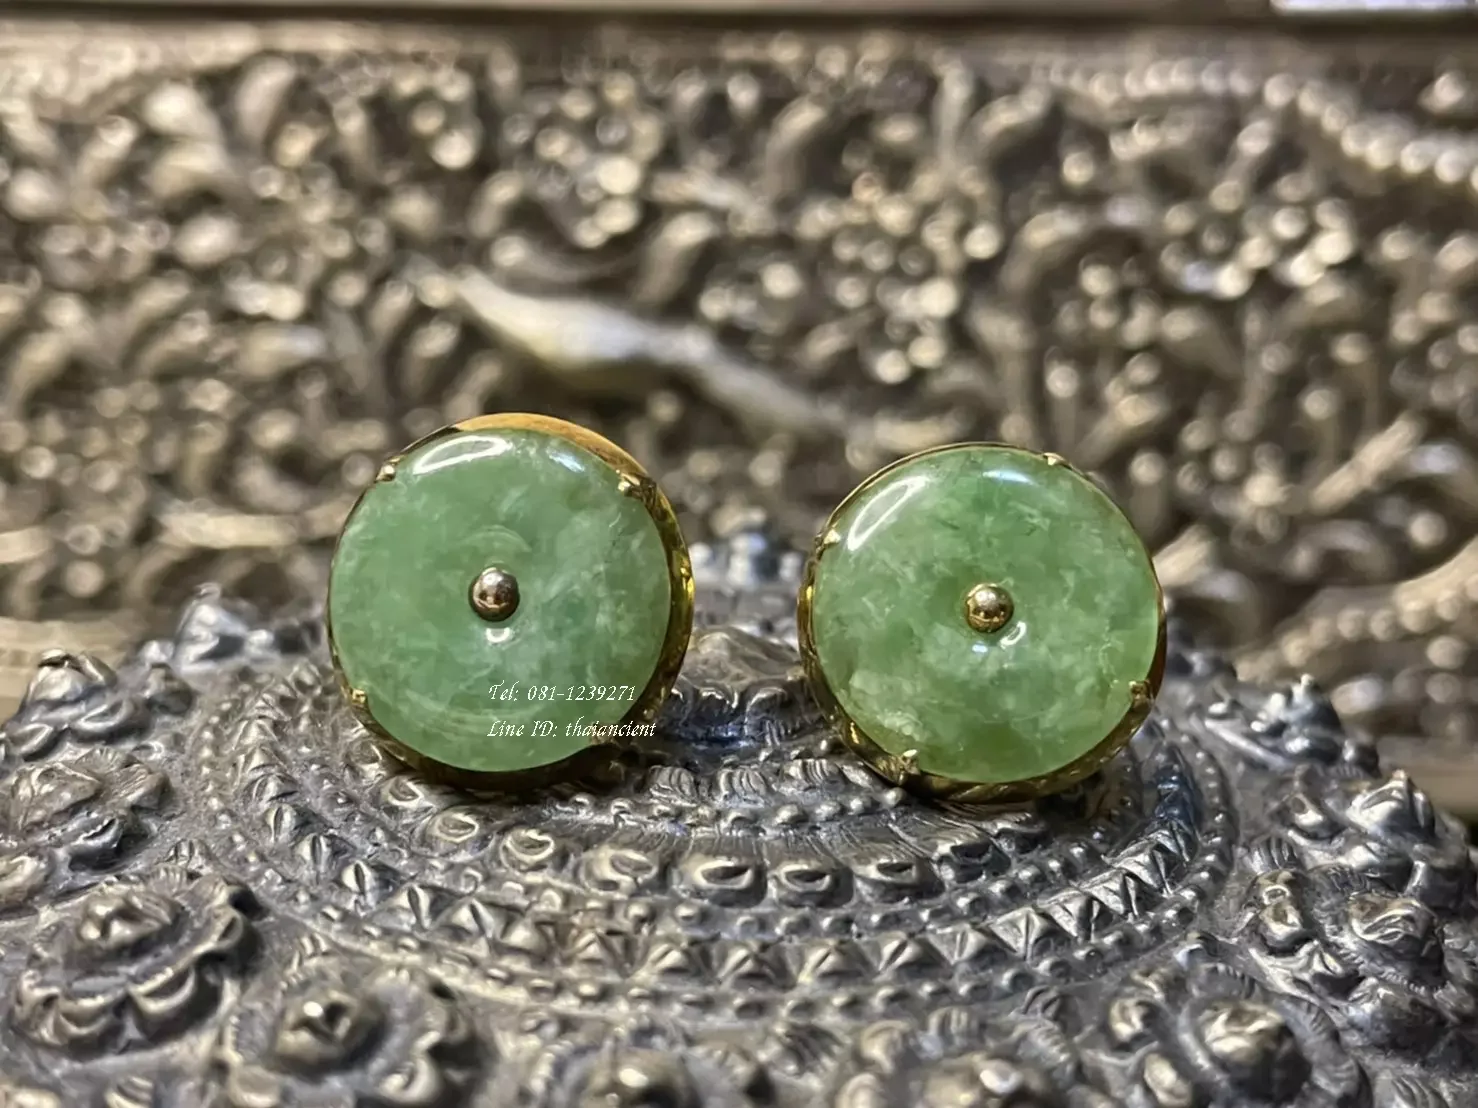 Jade Earrings – Gone to the heather